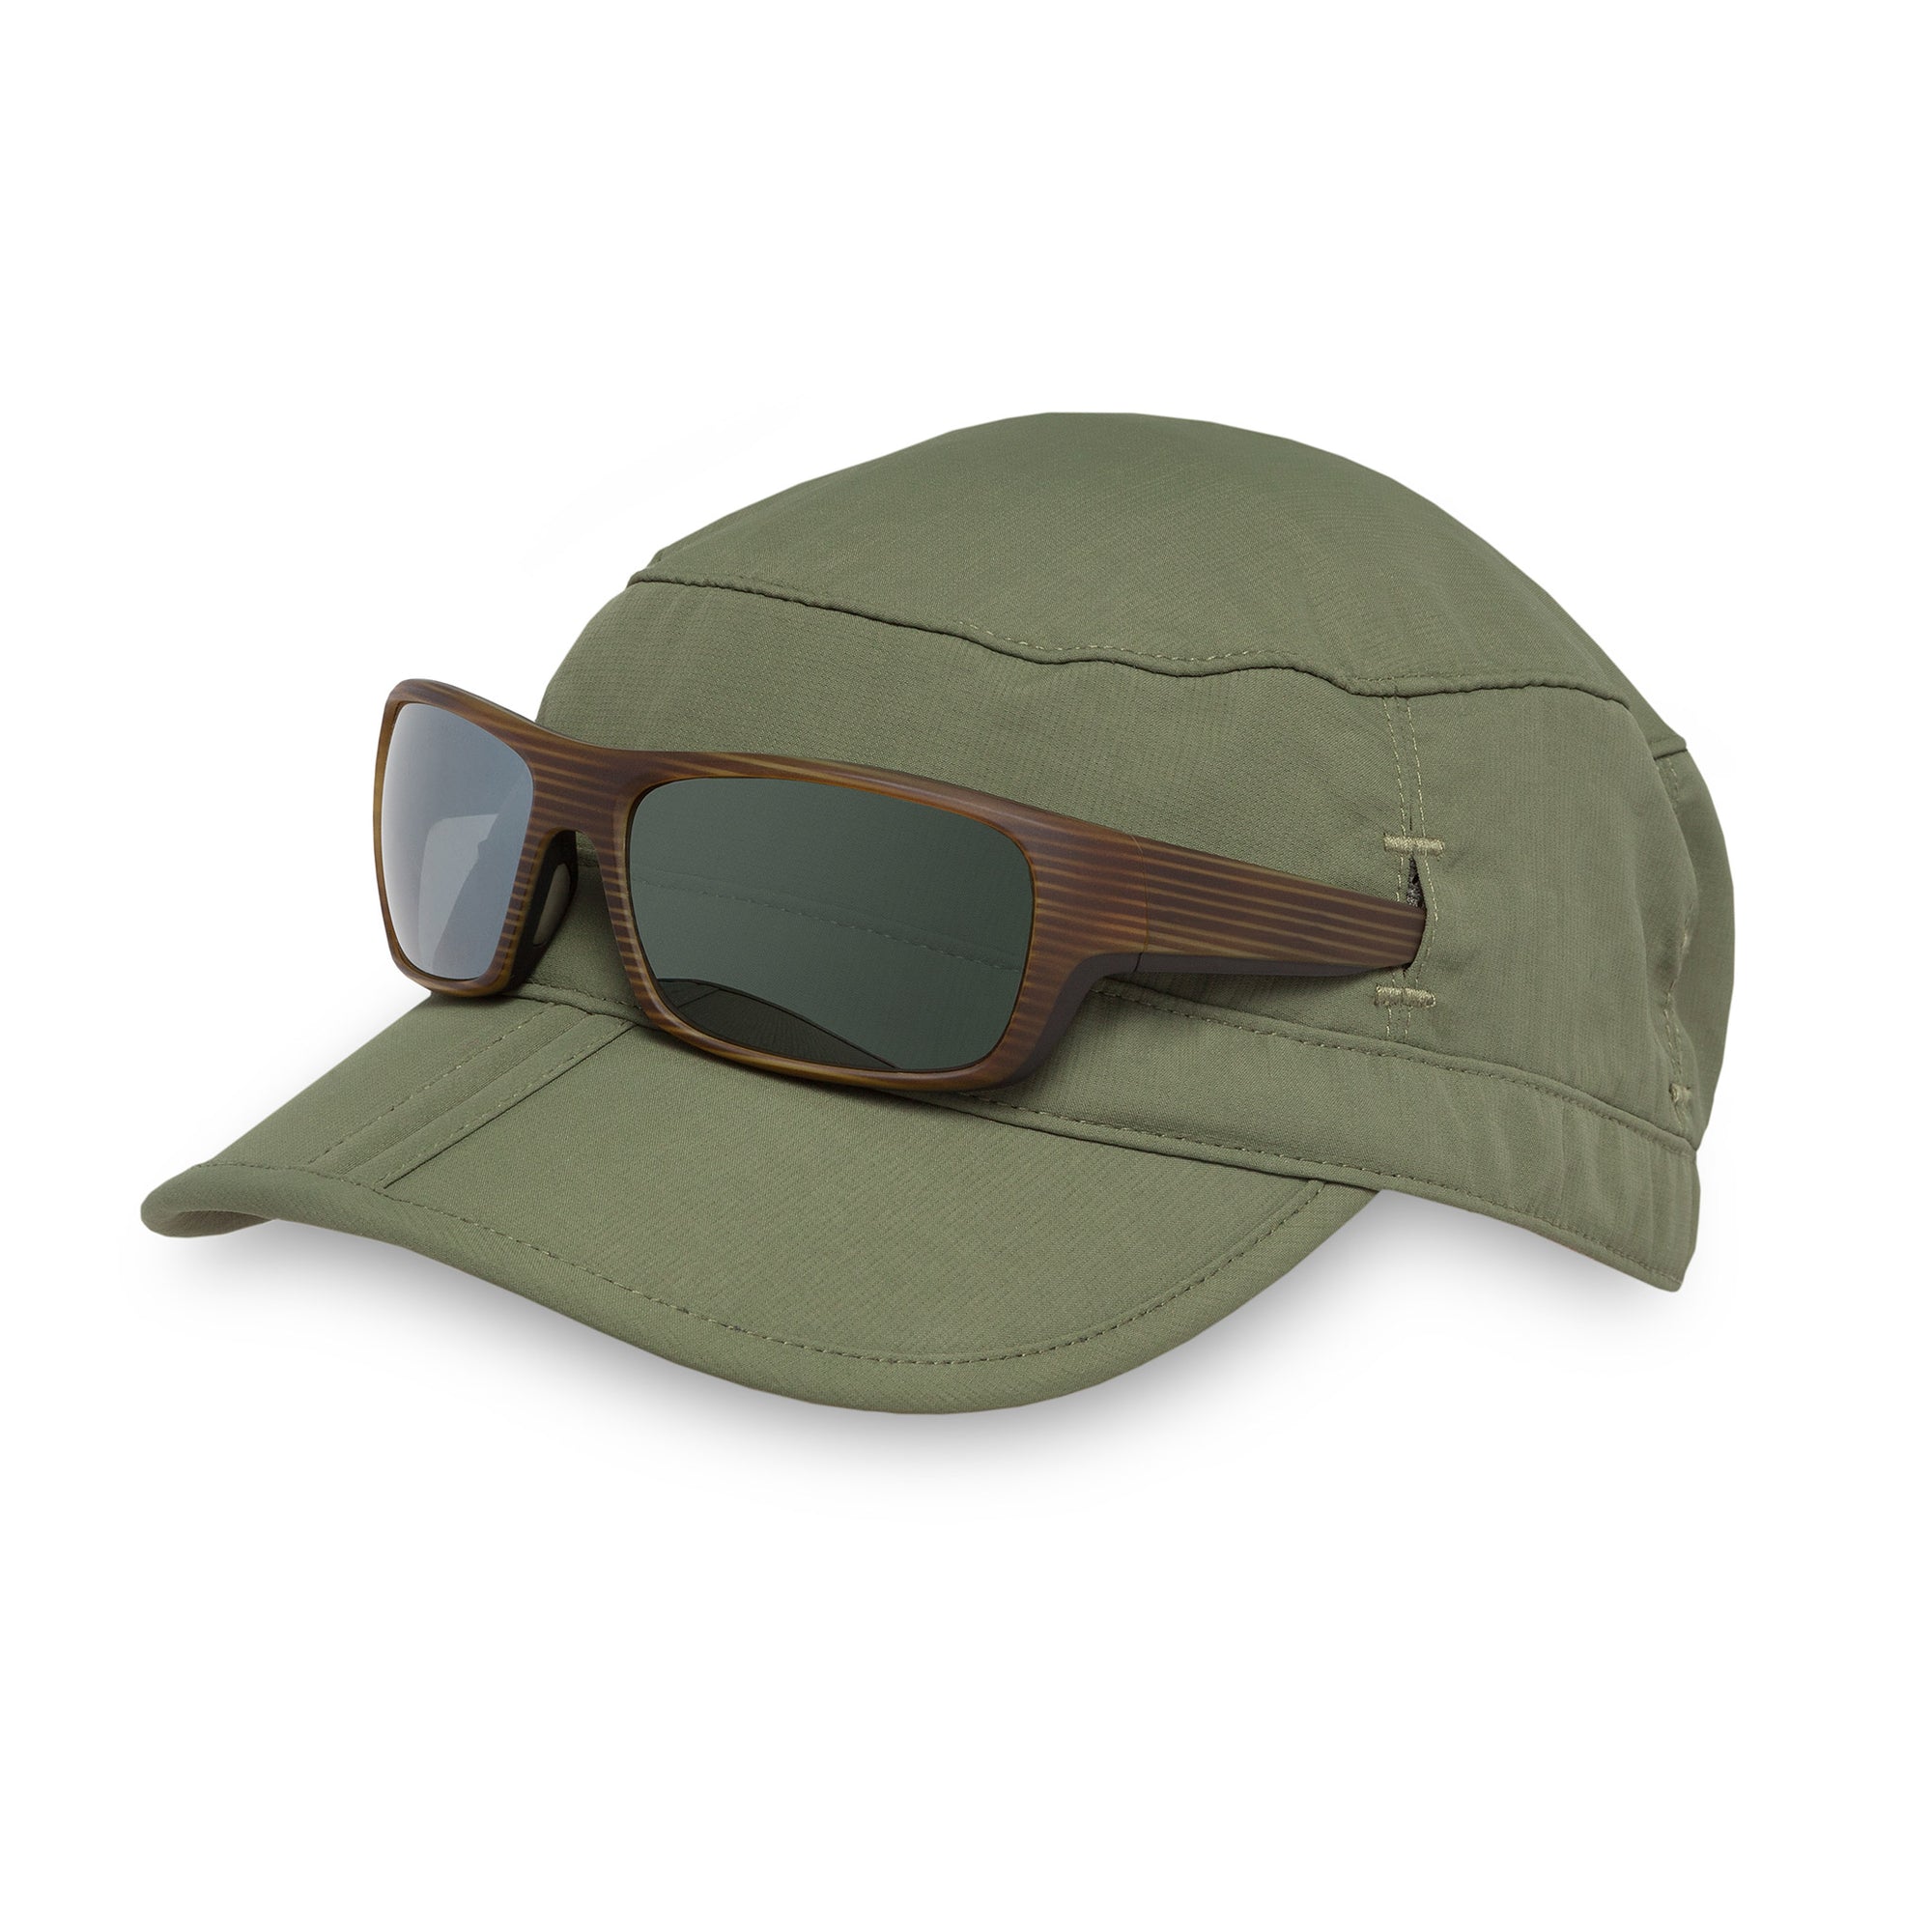 sunday afternoons sun tripper cap in timber with sunglasses